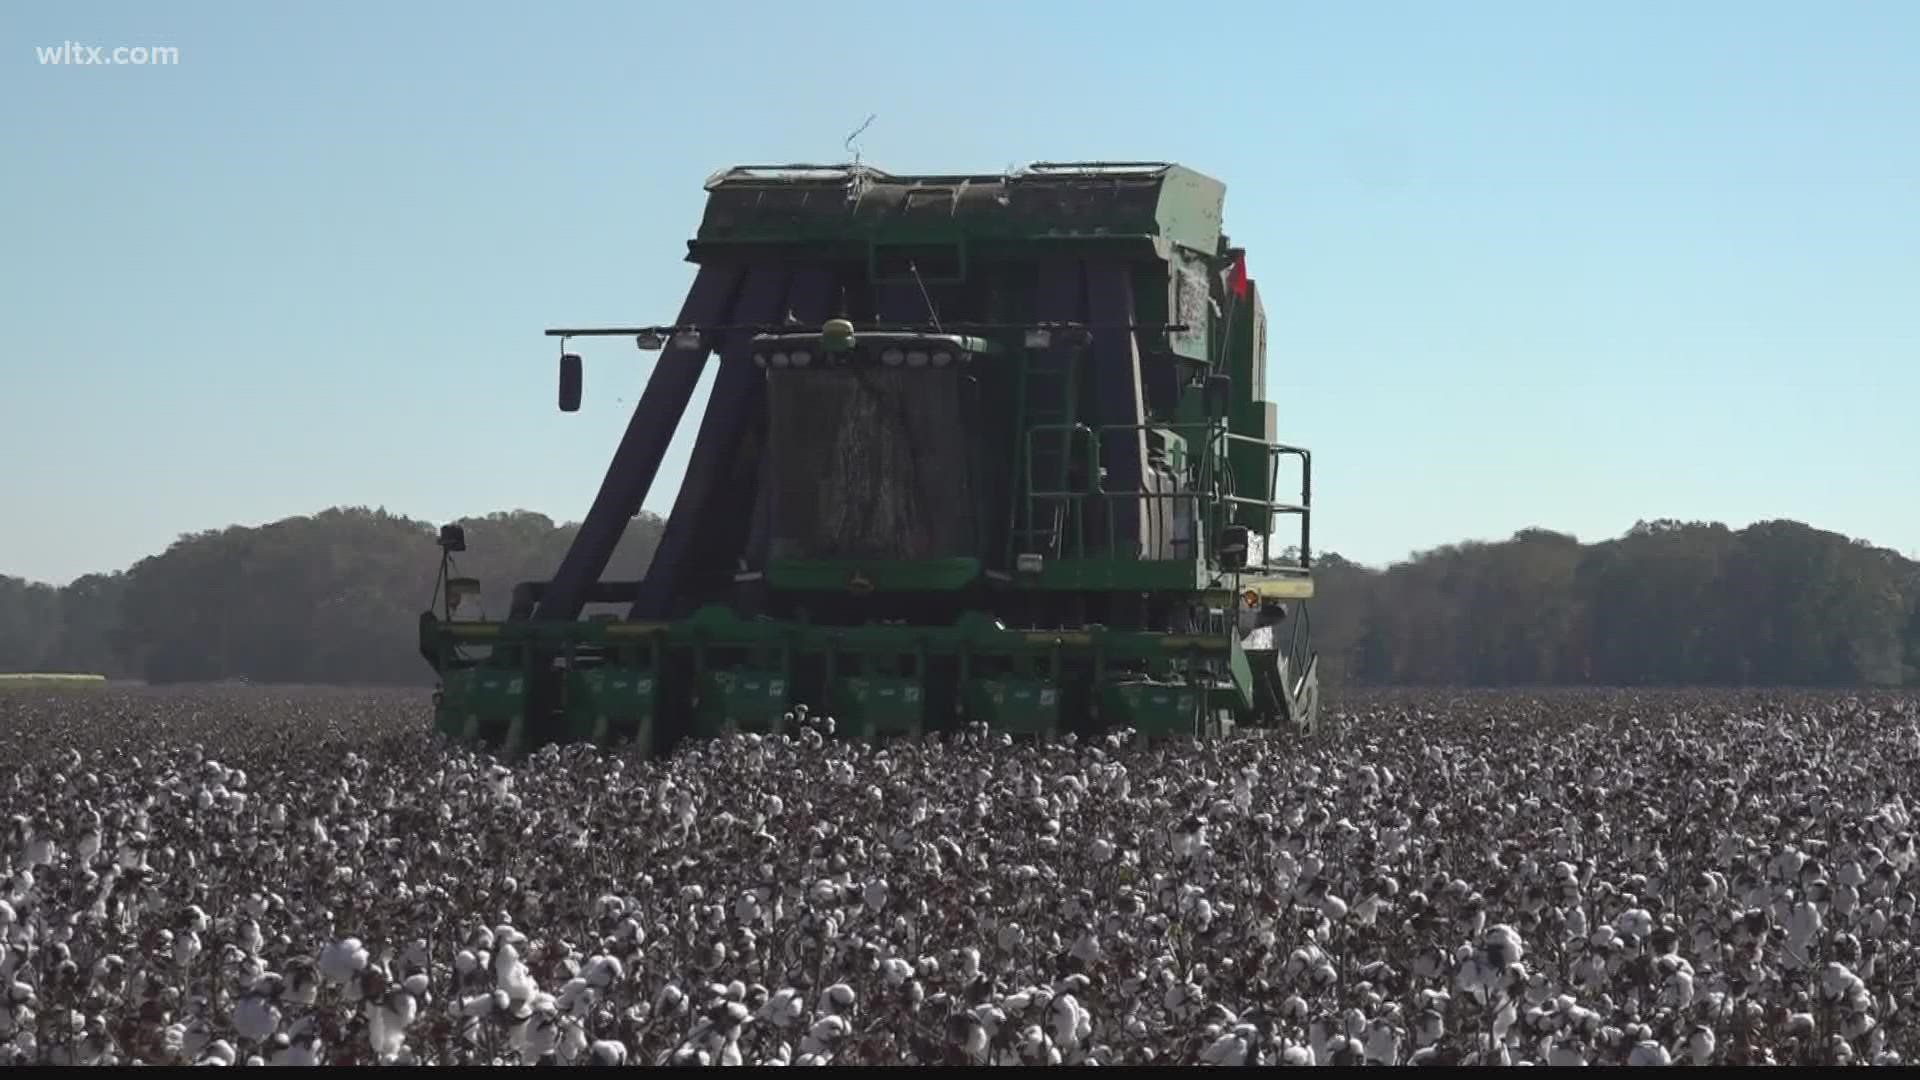 Harvesting cotton is a team effort that requires help amongst farmers.